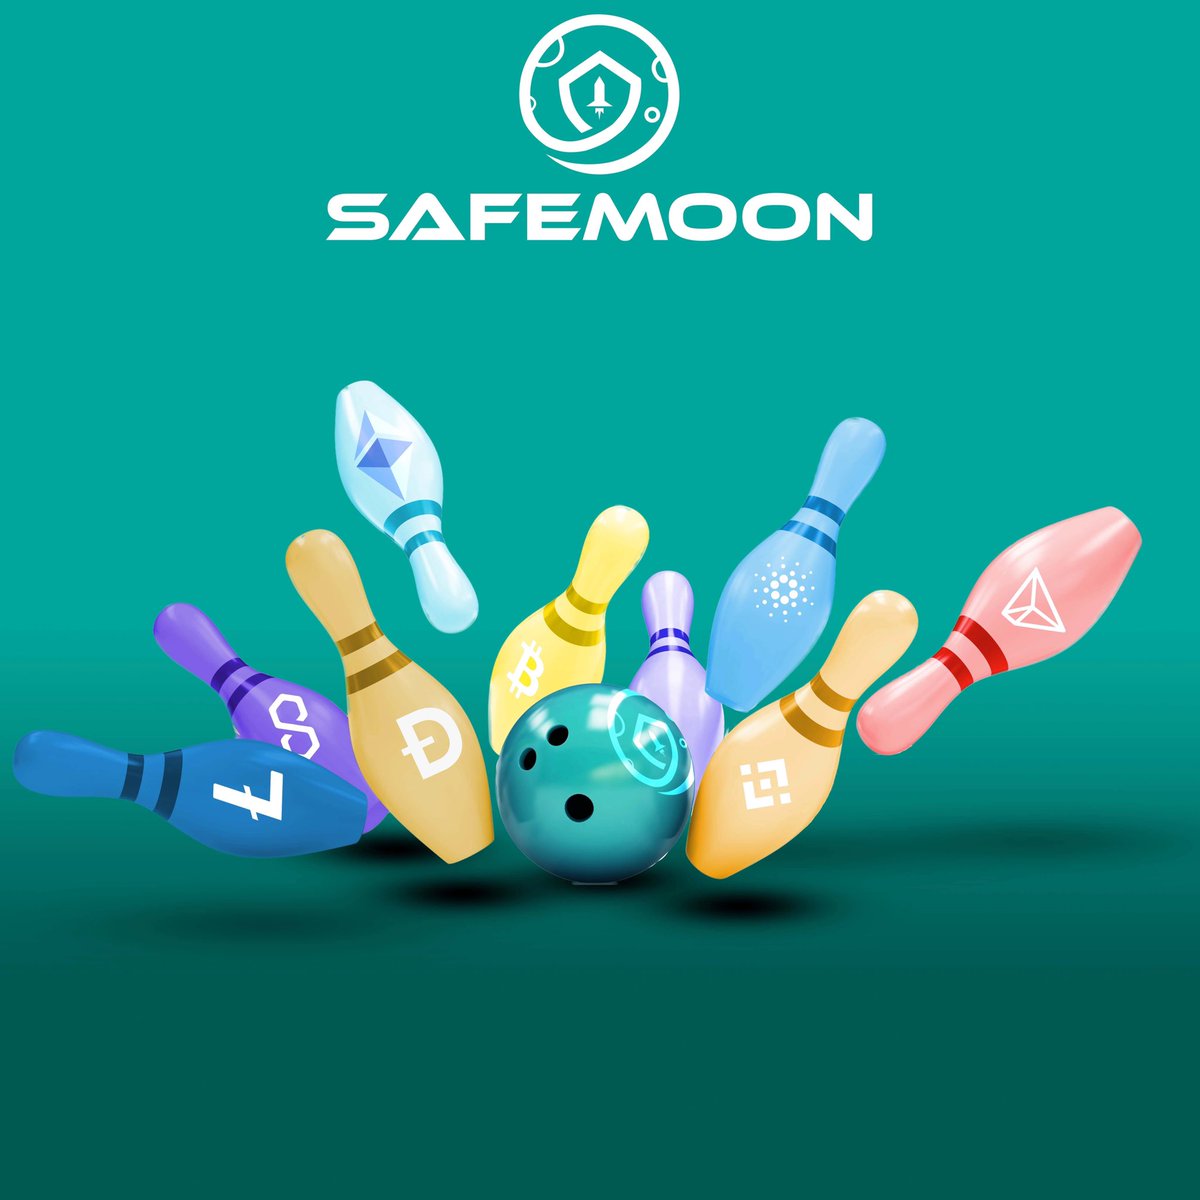 RT @safemoon: THERE’S ONLY ONE #SAFEMOON https://t.co/Qkee7WiCTs